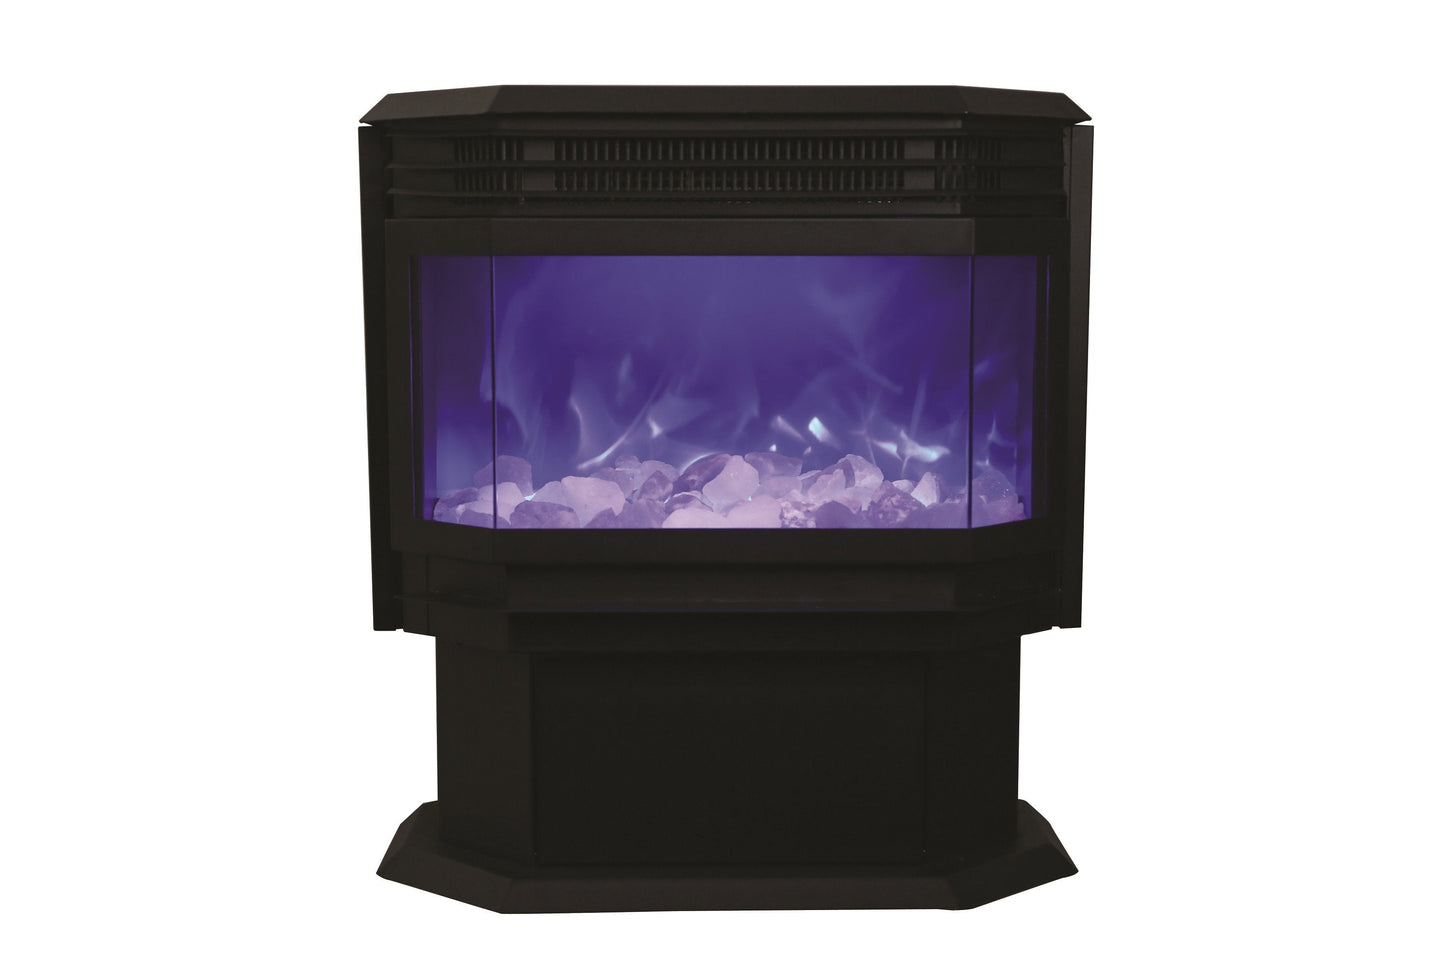 Sierra Flame 26" Free Standing Electric Fireplace - Electric Fireplace Shop